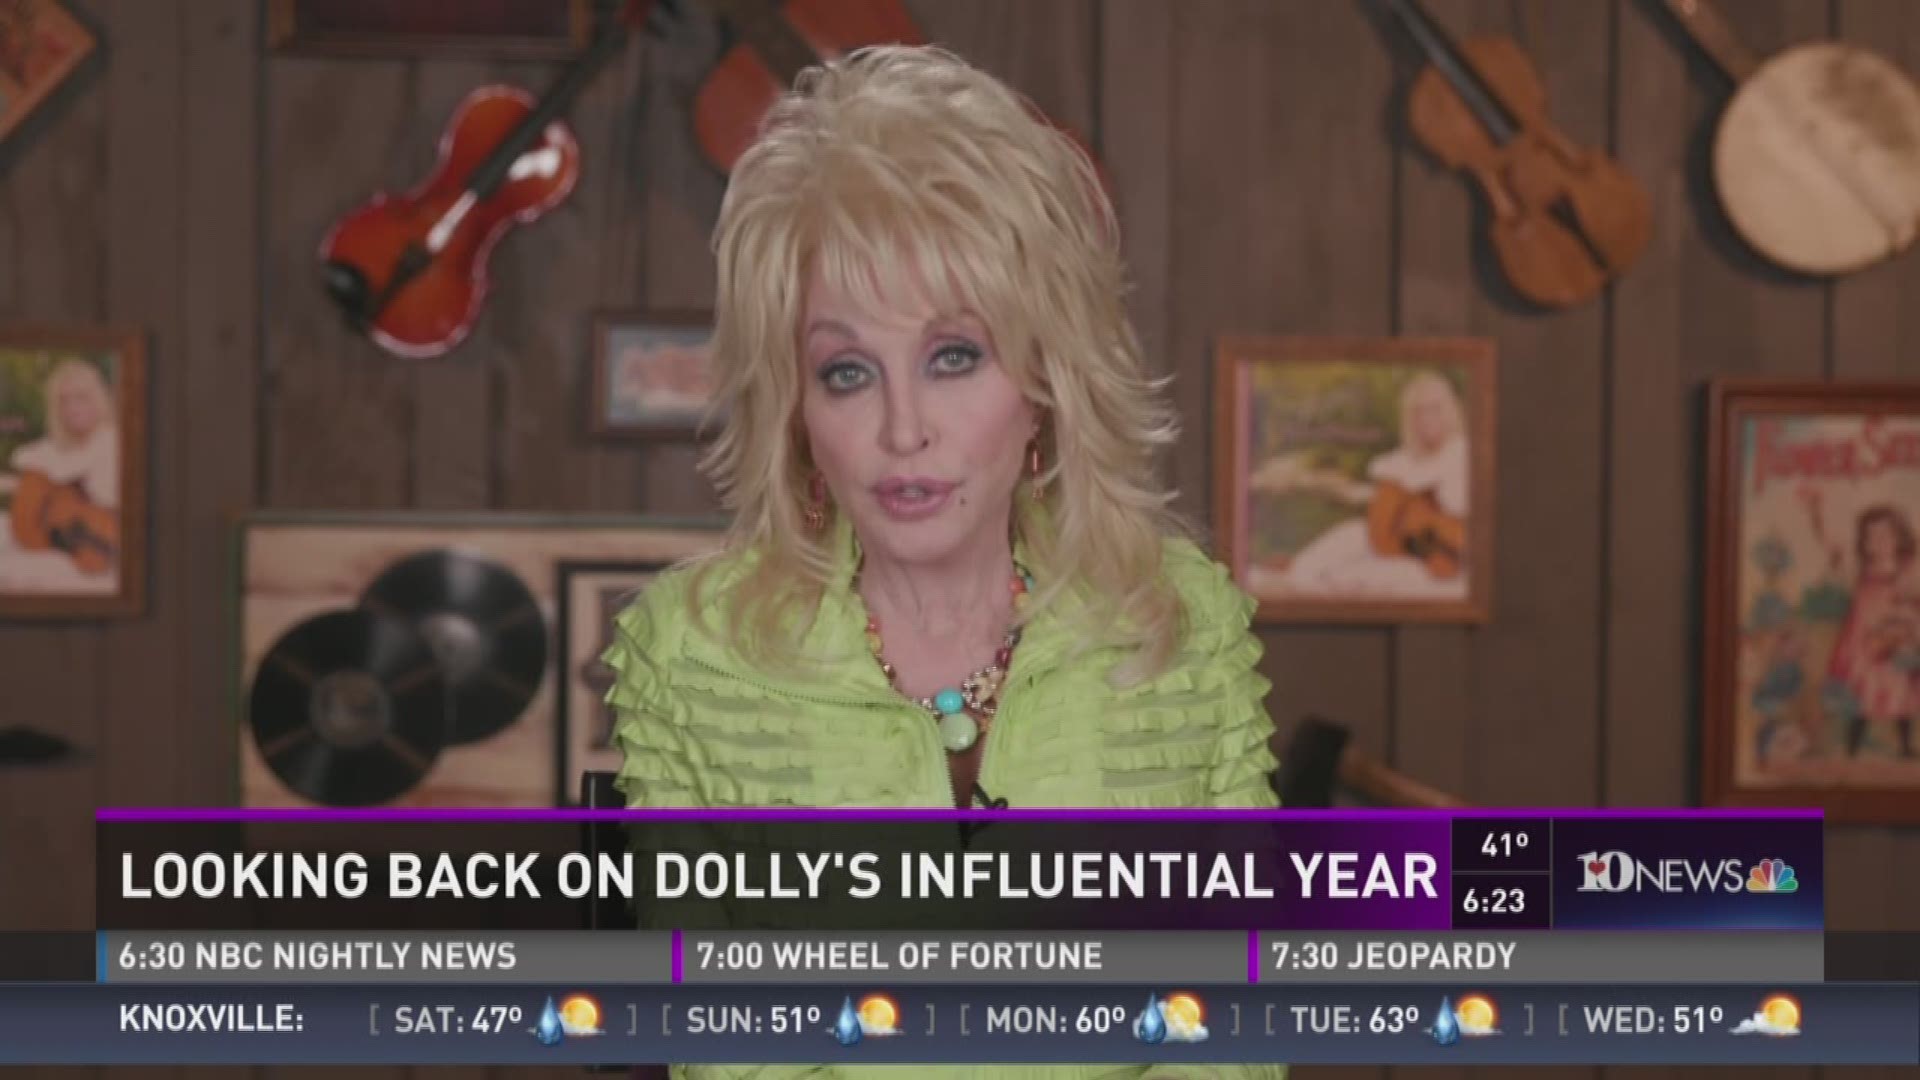 2016 was quite a year for Dolly Parton, and it ended with a selfless act much greater than her success.